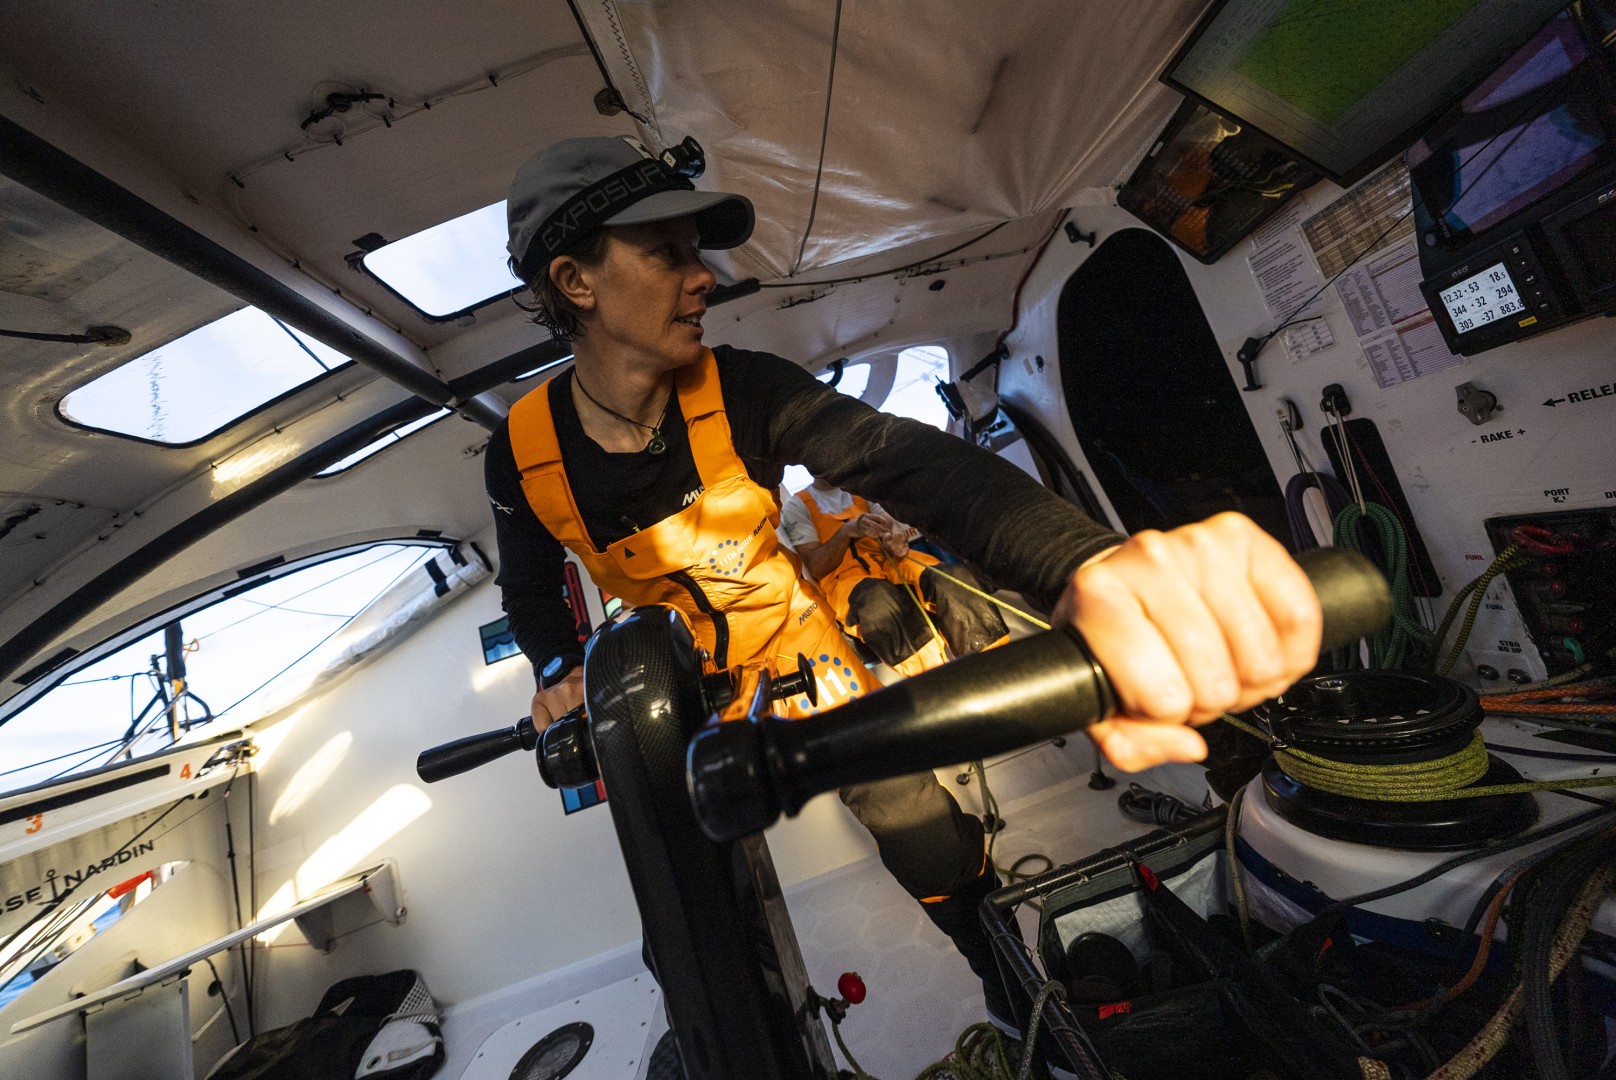 Leg 4 Day 14 onboard 11th Hour Racing Team. Francesca Clapcich grinding the mainsail for Simon Fisher at sunrise.
© Amory Ross / 11th Hour Racing / The Ocean Race